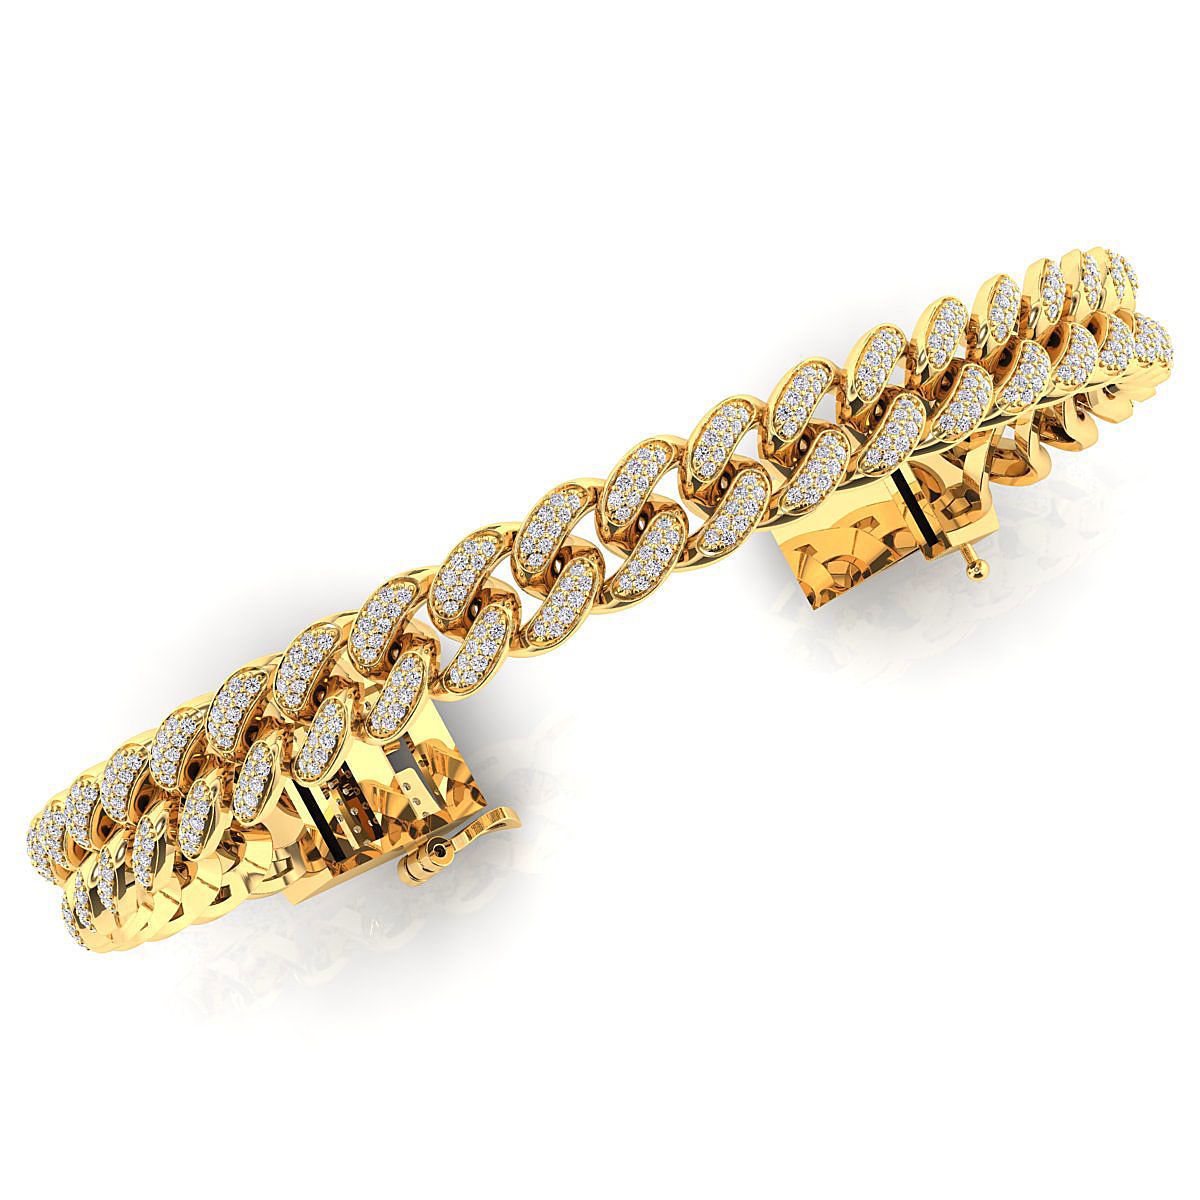 Moissanite cuban bracelet in gold and sterling silver